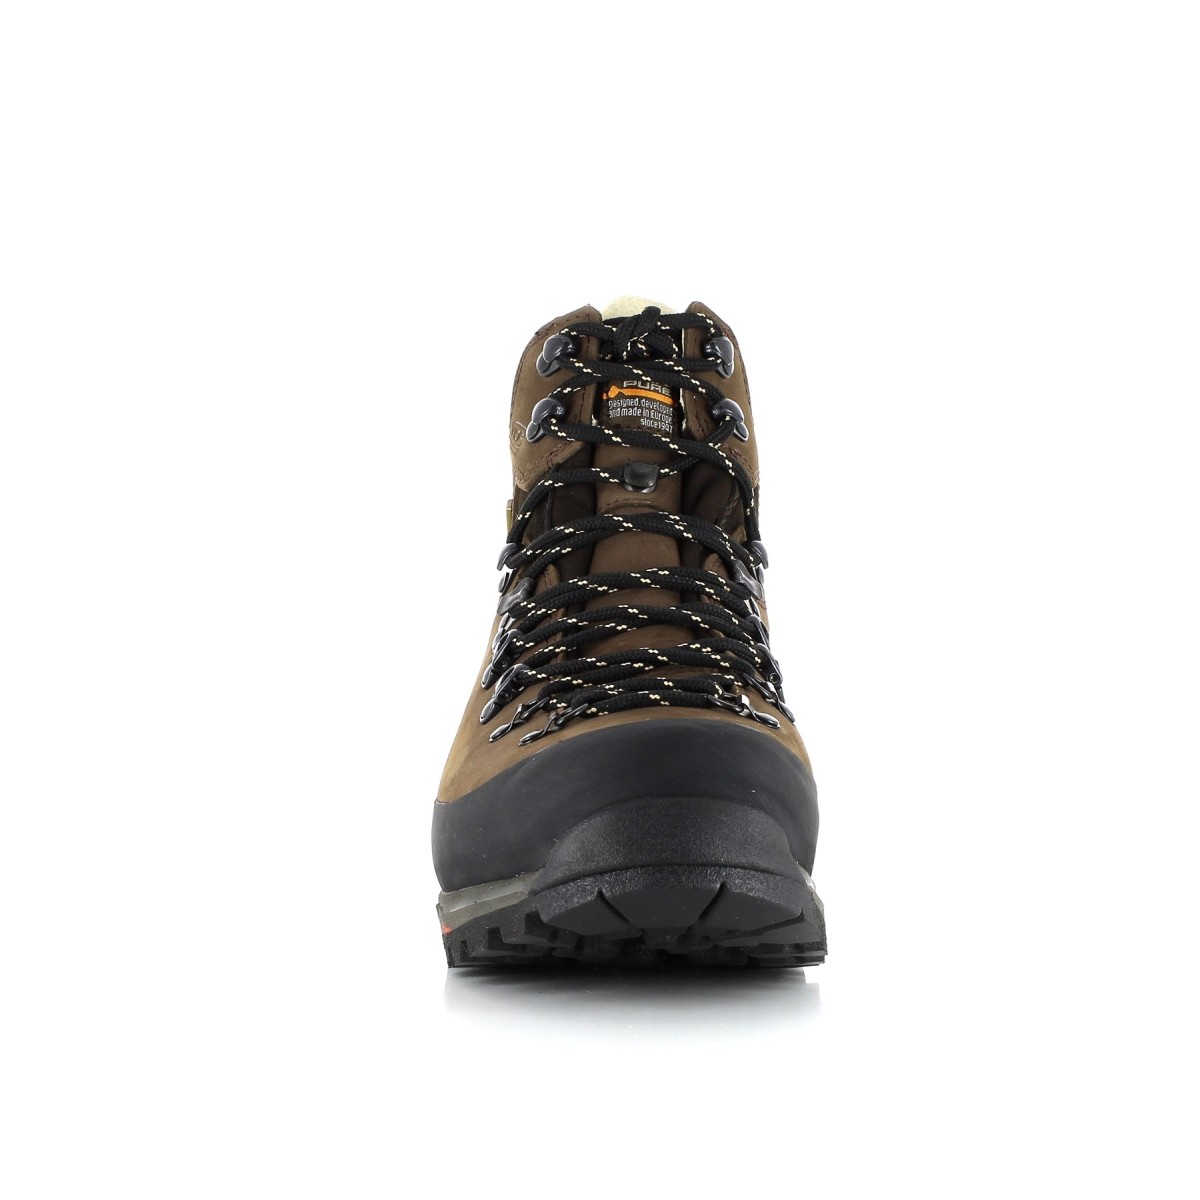 NEPAL BROWN winter hiking shoes ALPINA - view 3